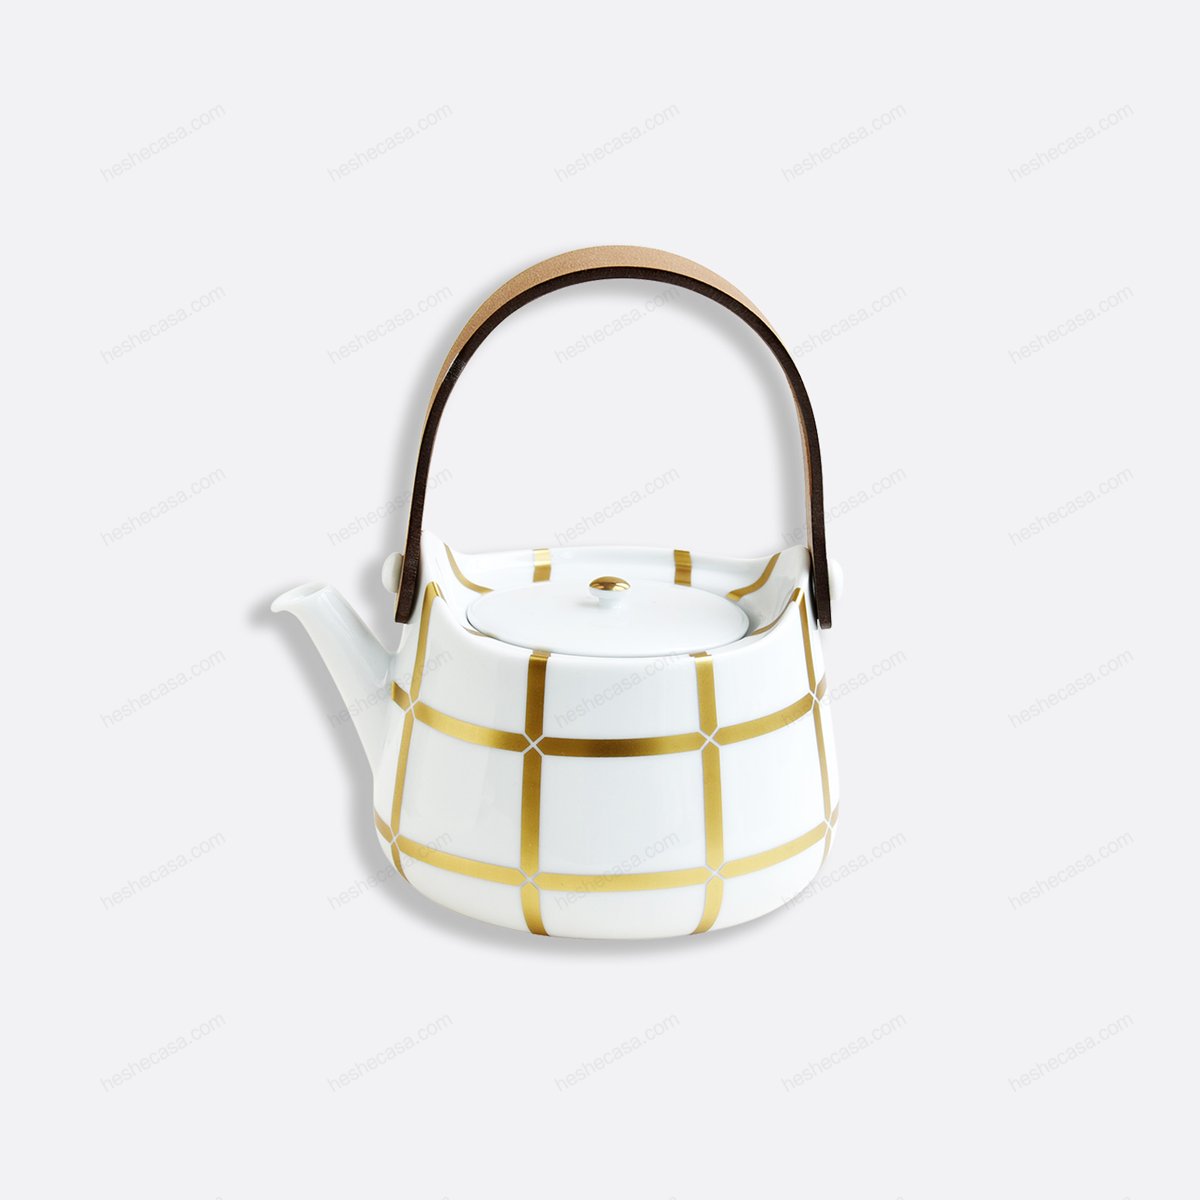 Maillage Or Teapot 8 Cups 30.4 Oz 茶壶